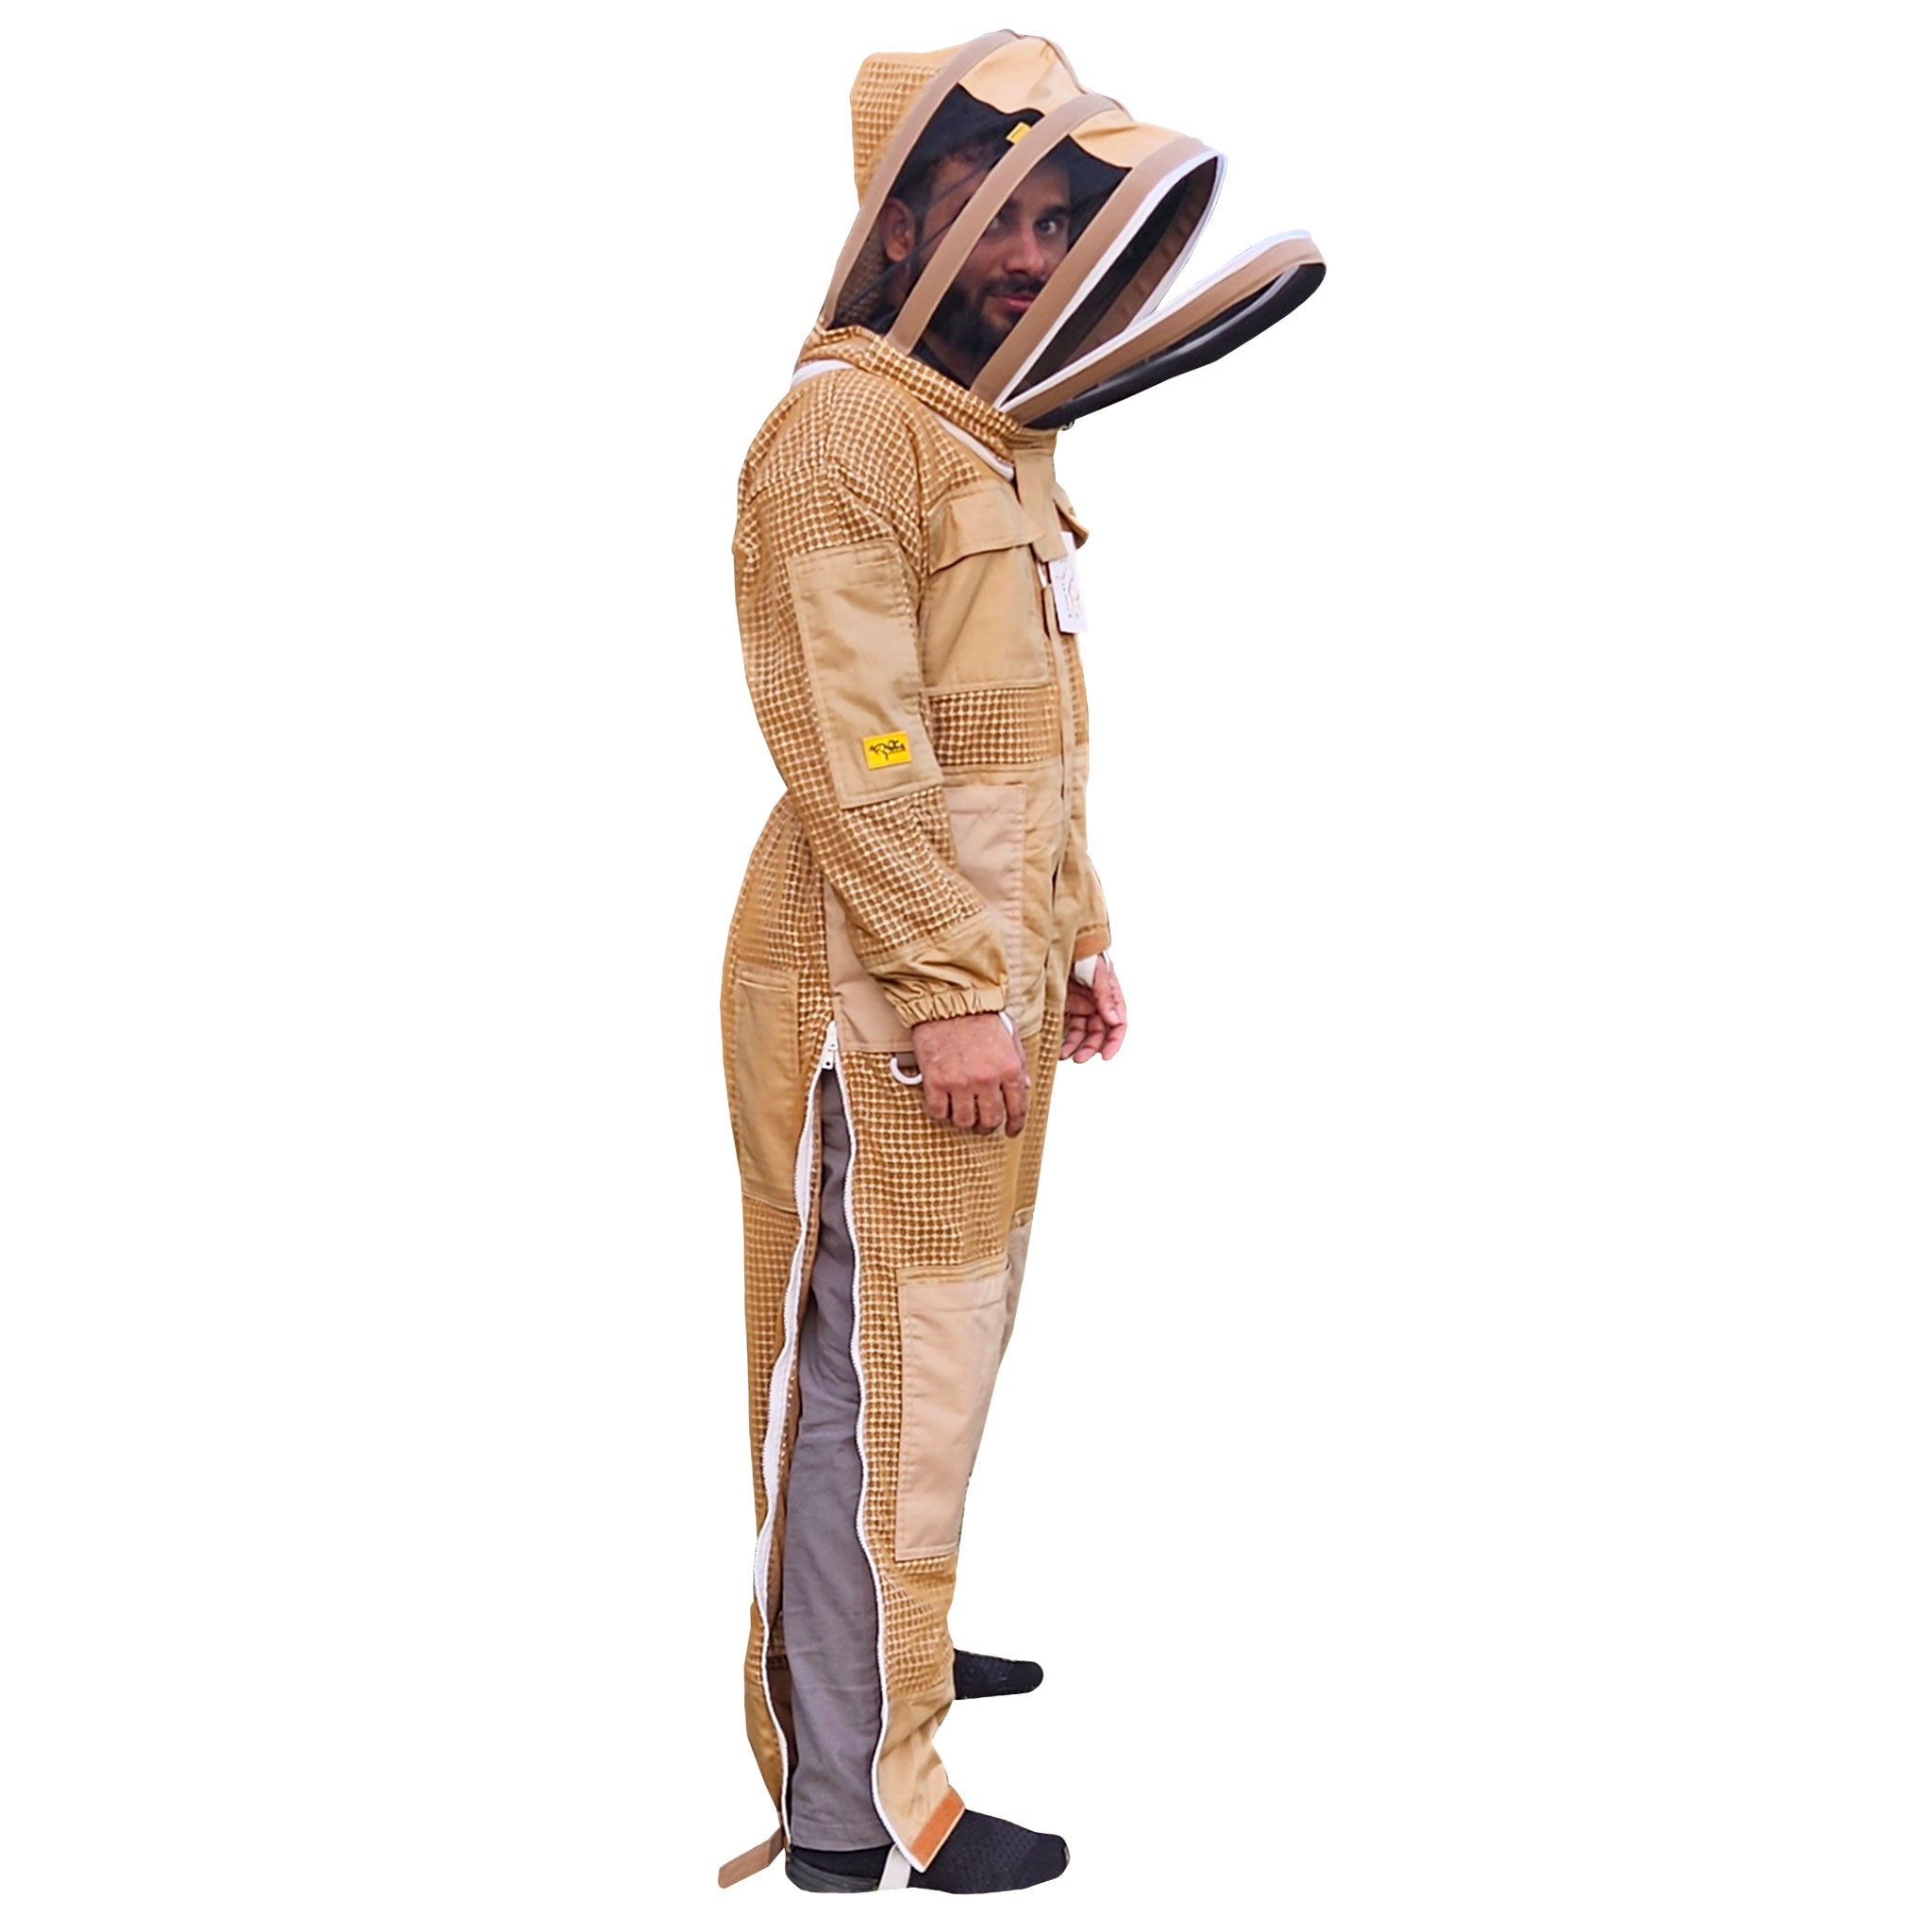 Khaki ventilated beekeeping suit by OZ ARMOUR with 3 layer mesh and fencing veil